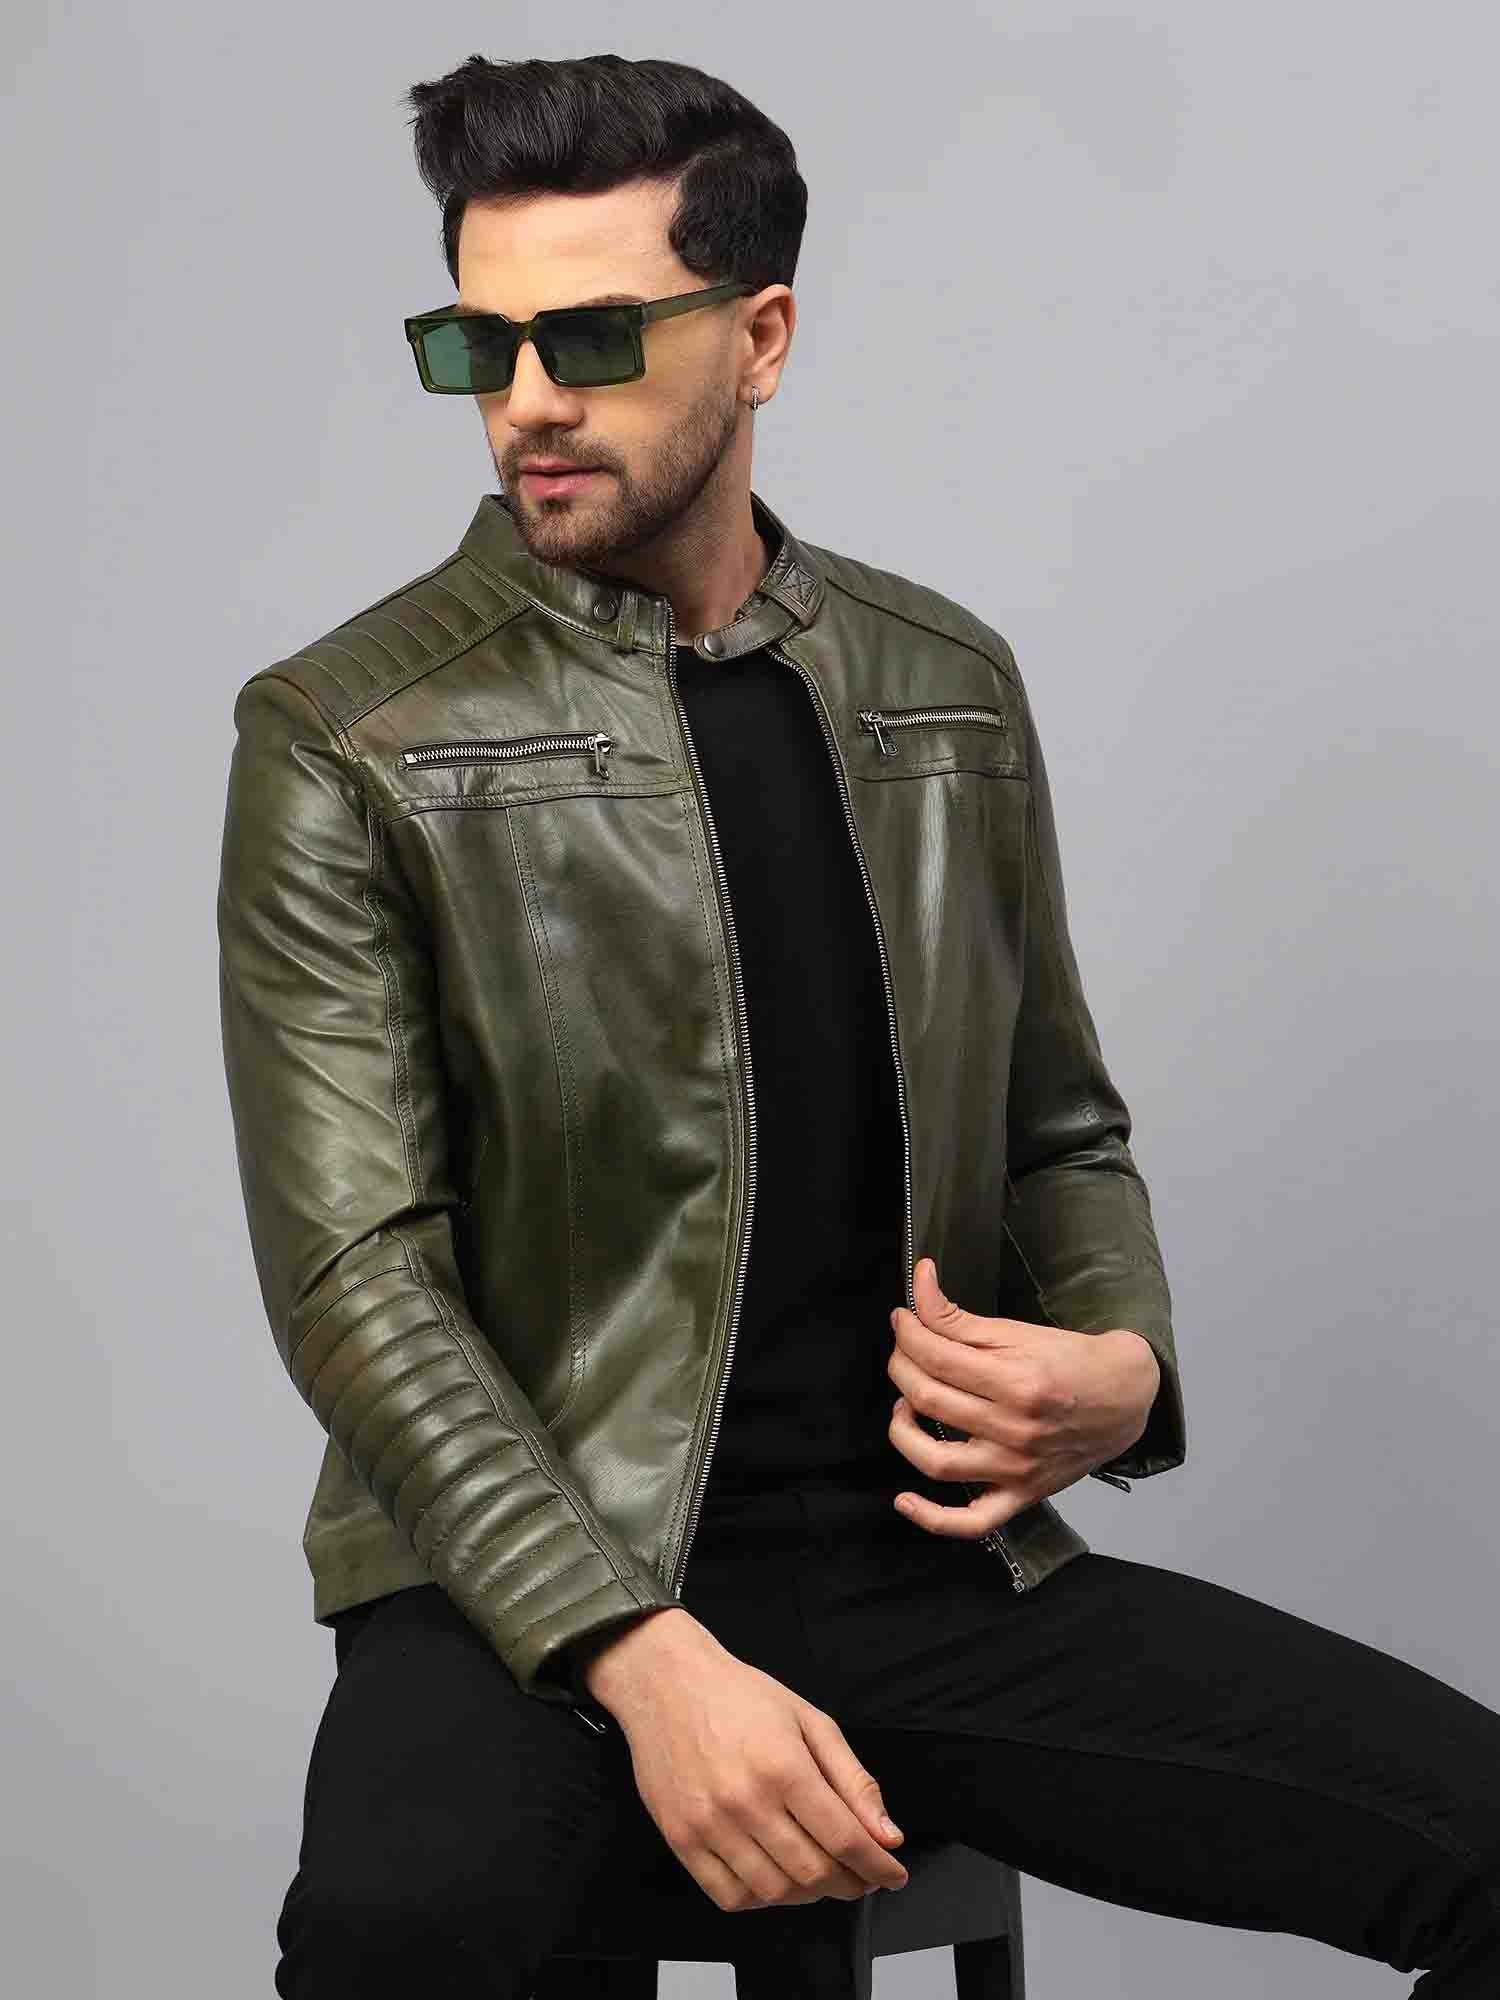 Cool Jackets | Green jacket men, Leather jacket outfit men, Hoodie outfit  men